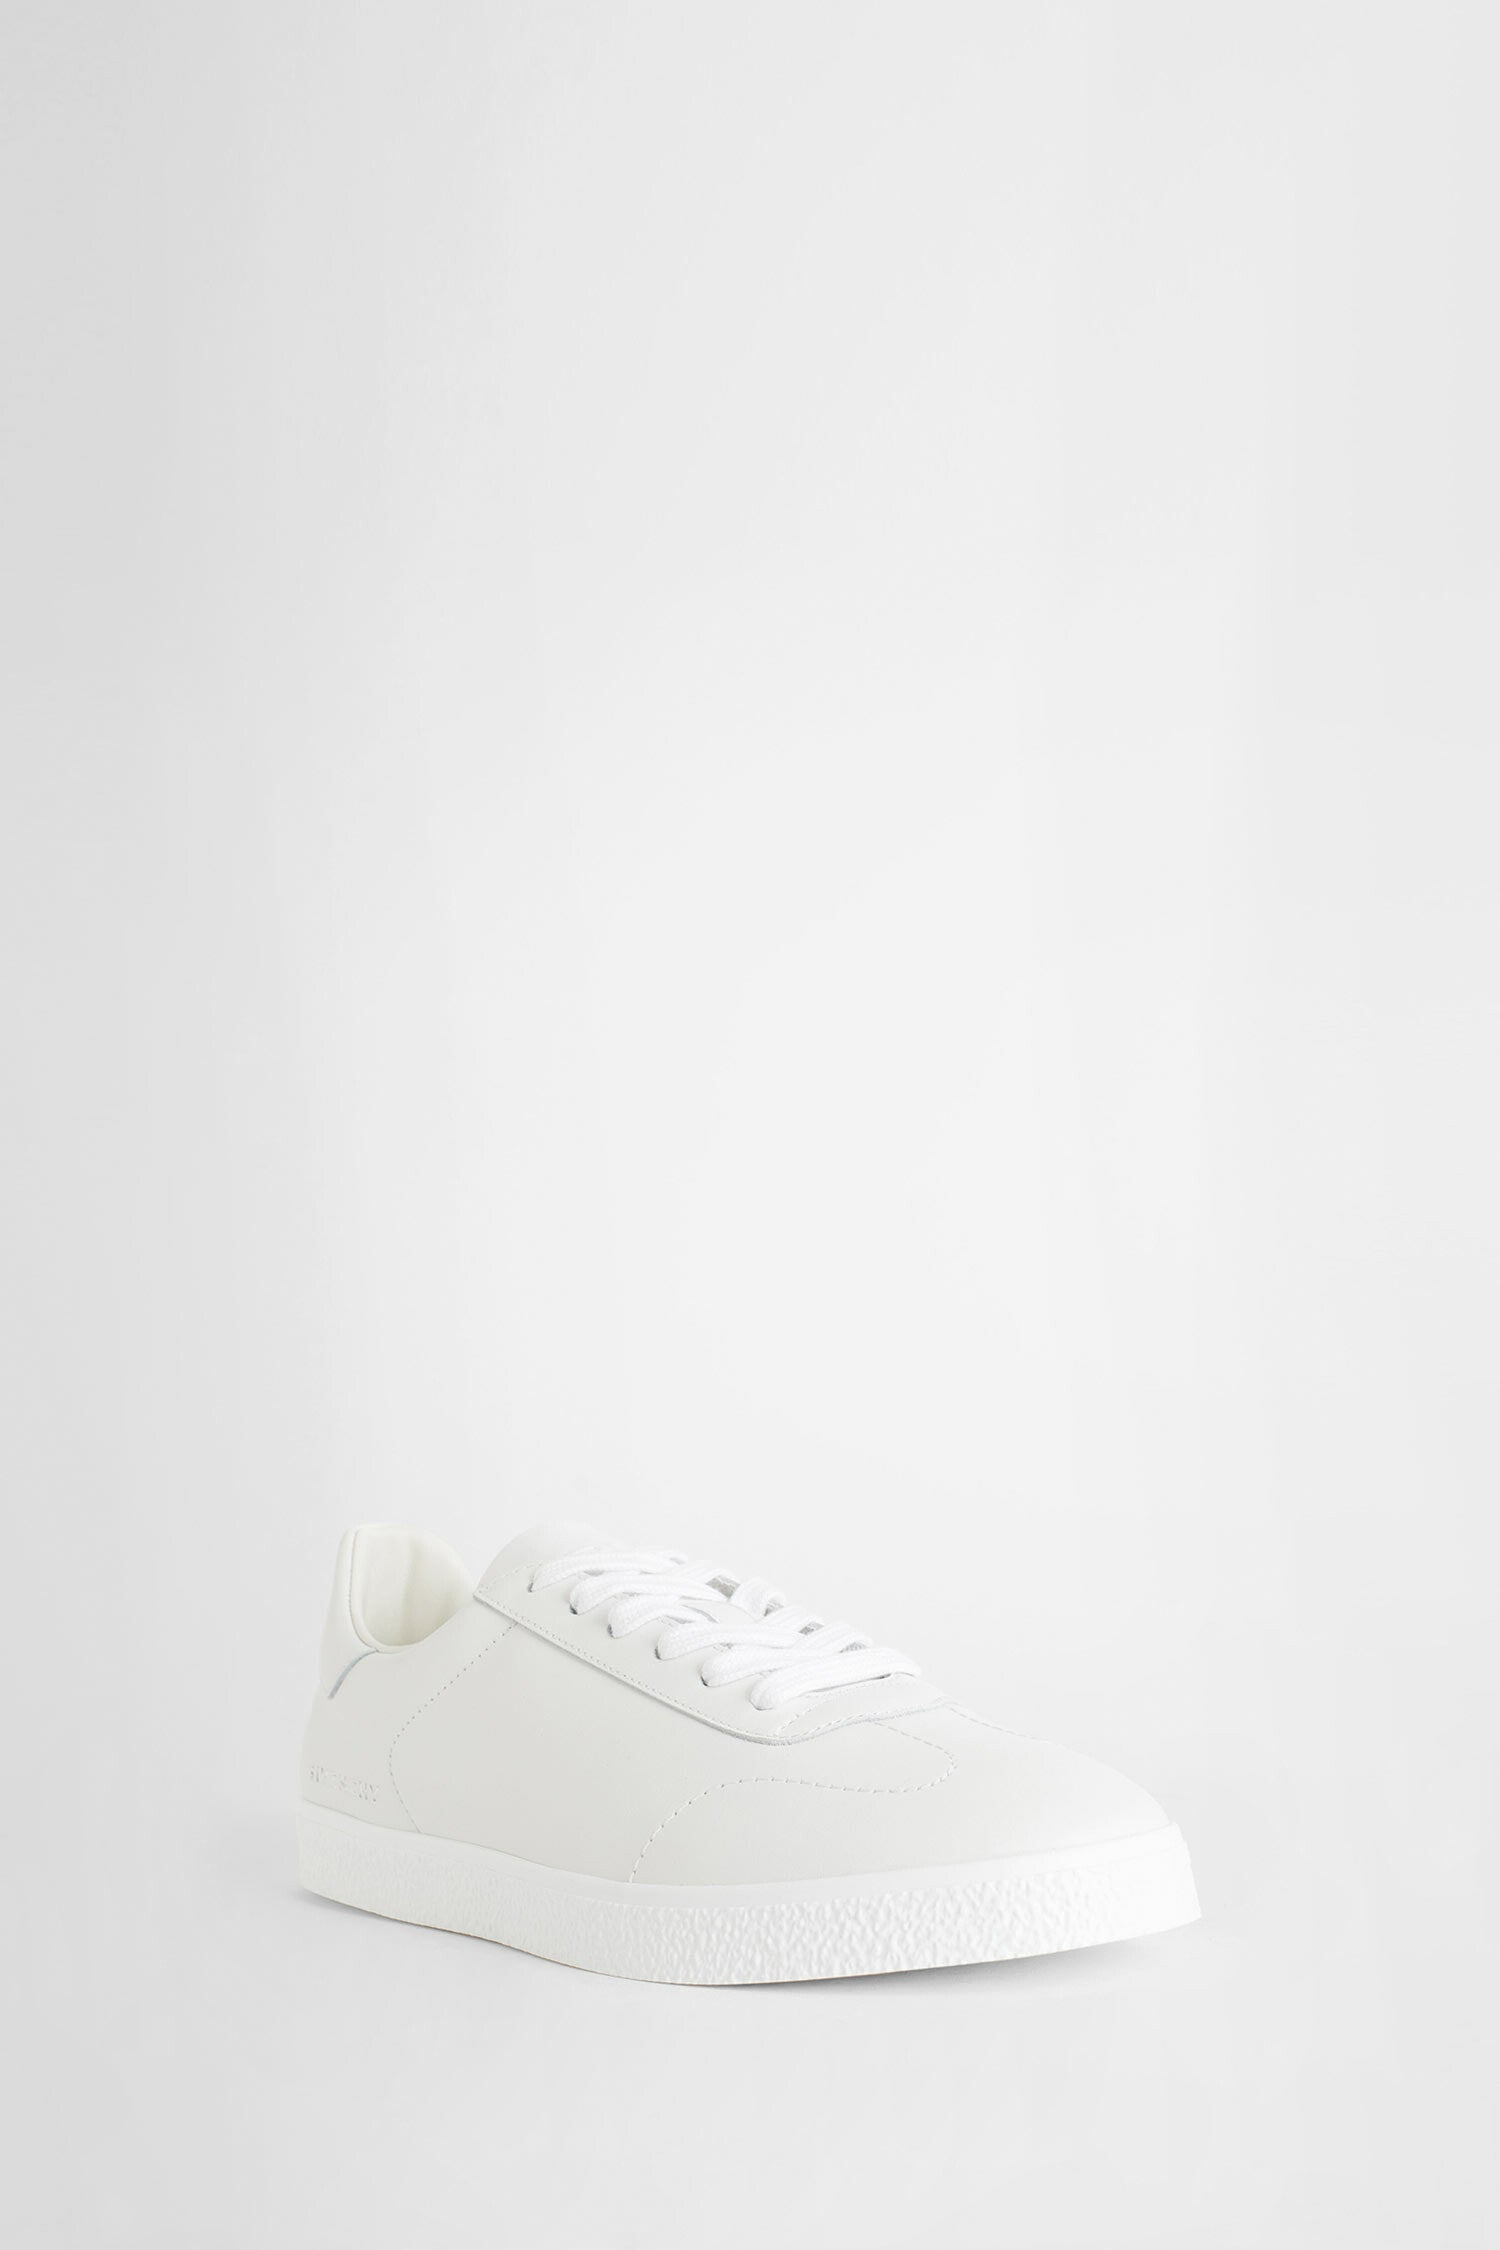 GIVENCHY WOMAN WHITE SNEAKERS